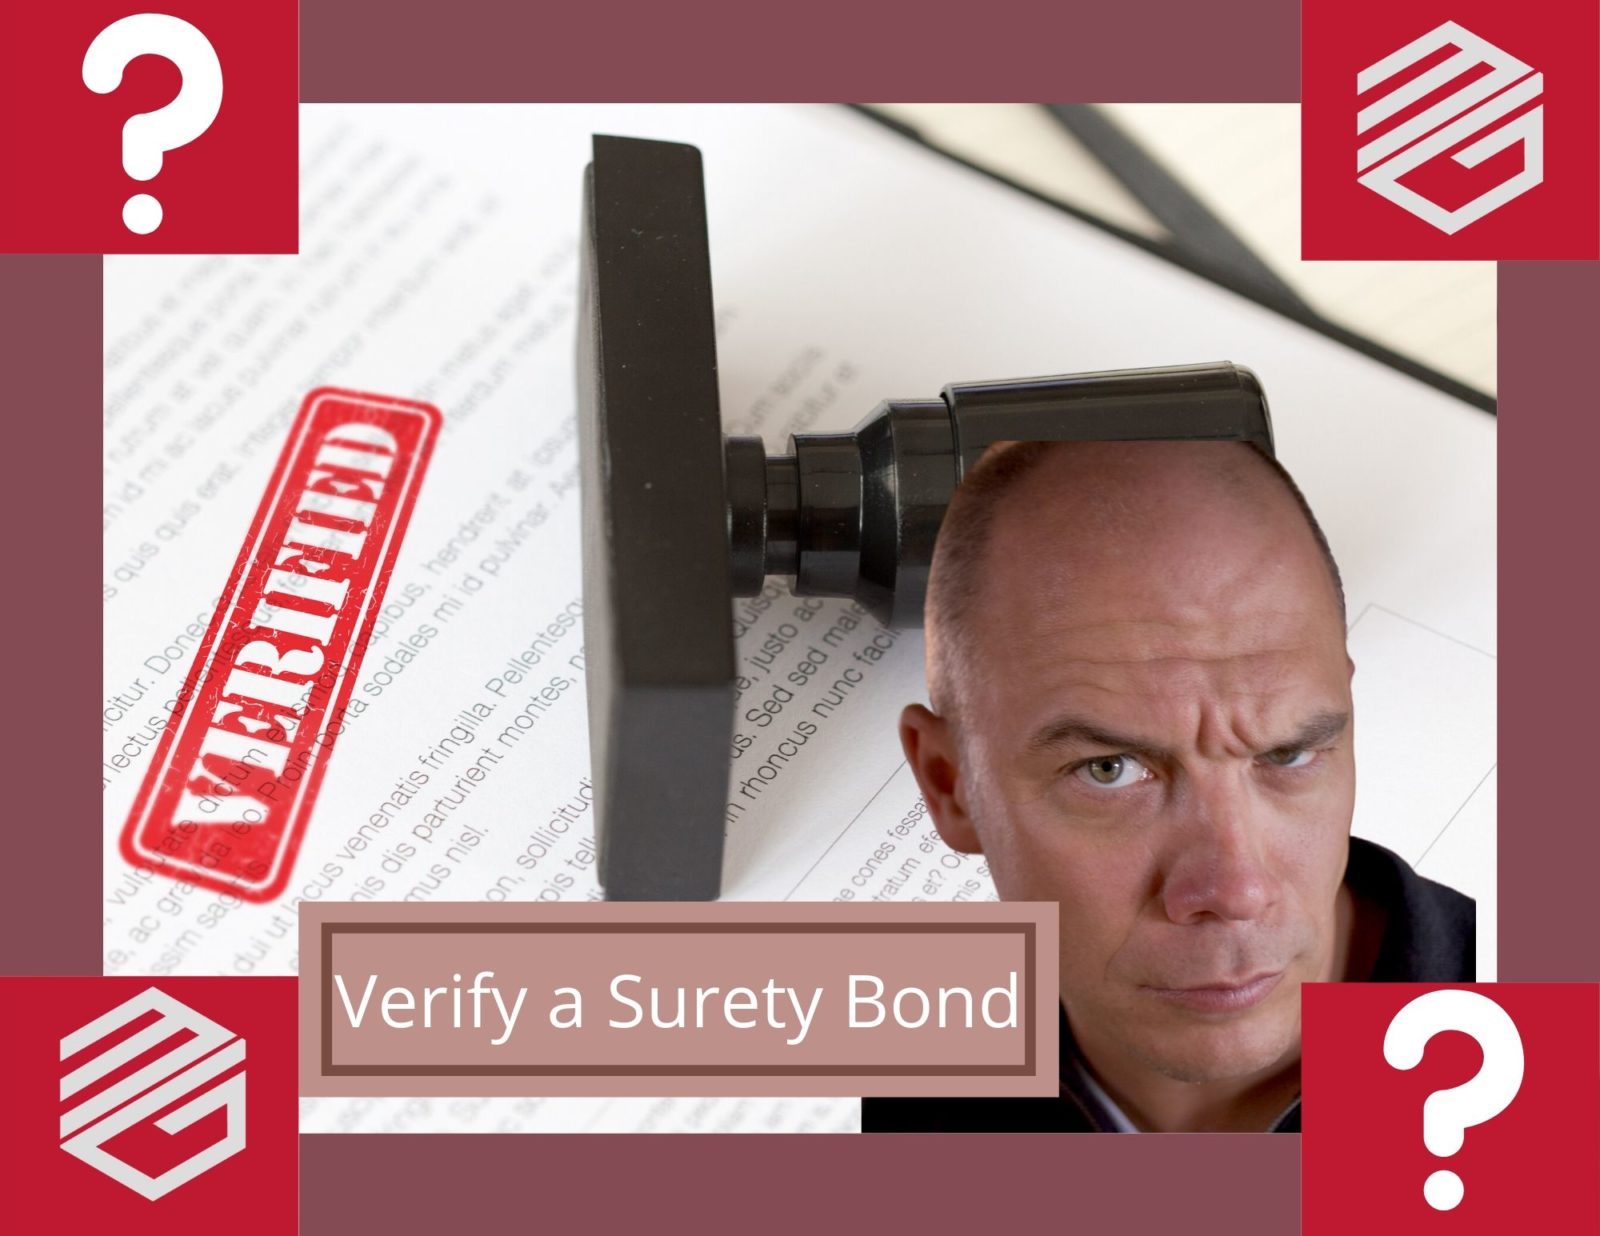 Verify a Surety Bond - Picutre of a man looking suspicious. In the background is a stamp with the word Verified on a piece of paper. Red border around the picture with two white questions marks. "Verify a surety bond" in a text box